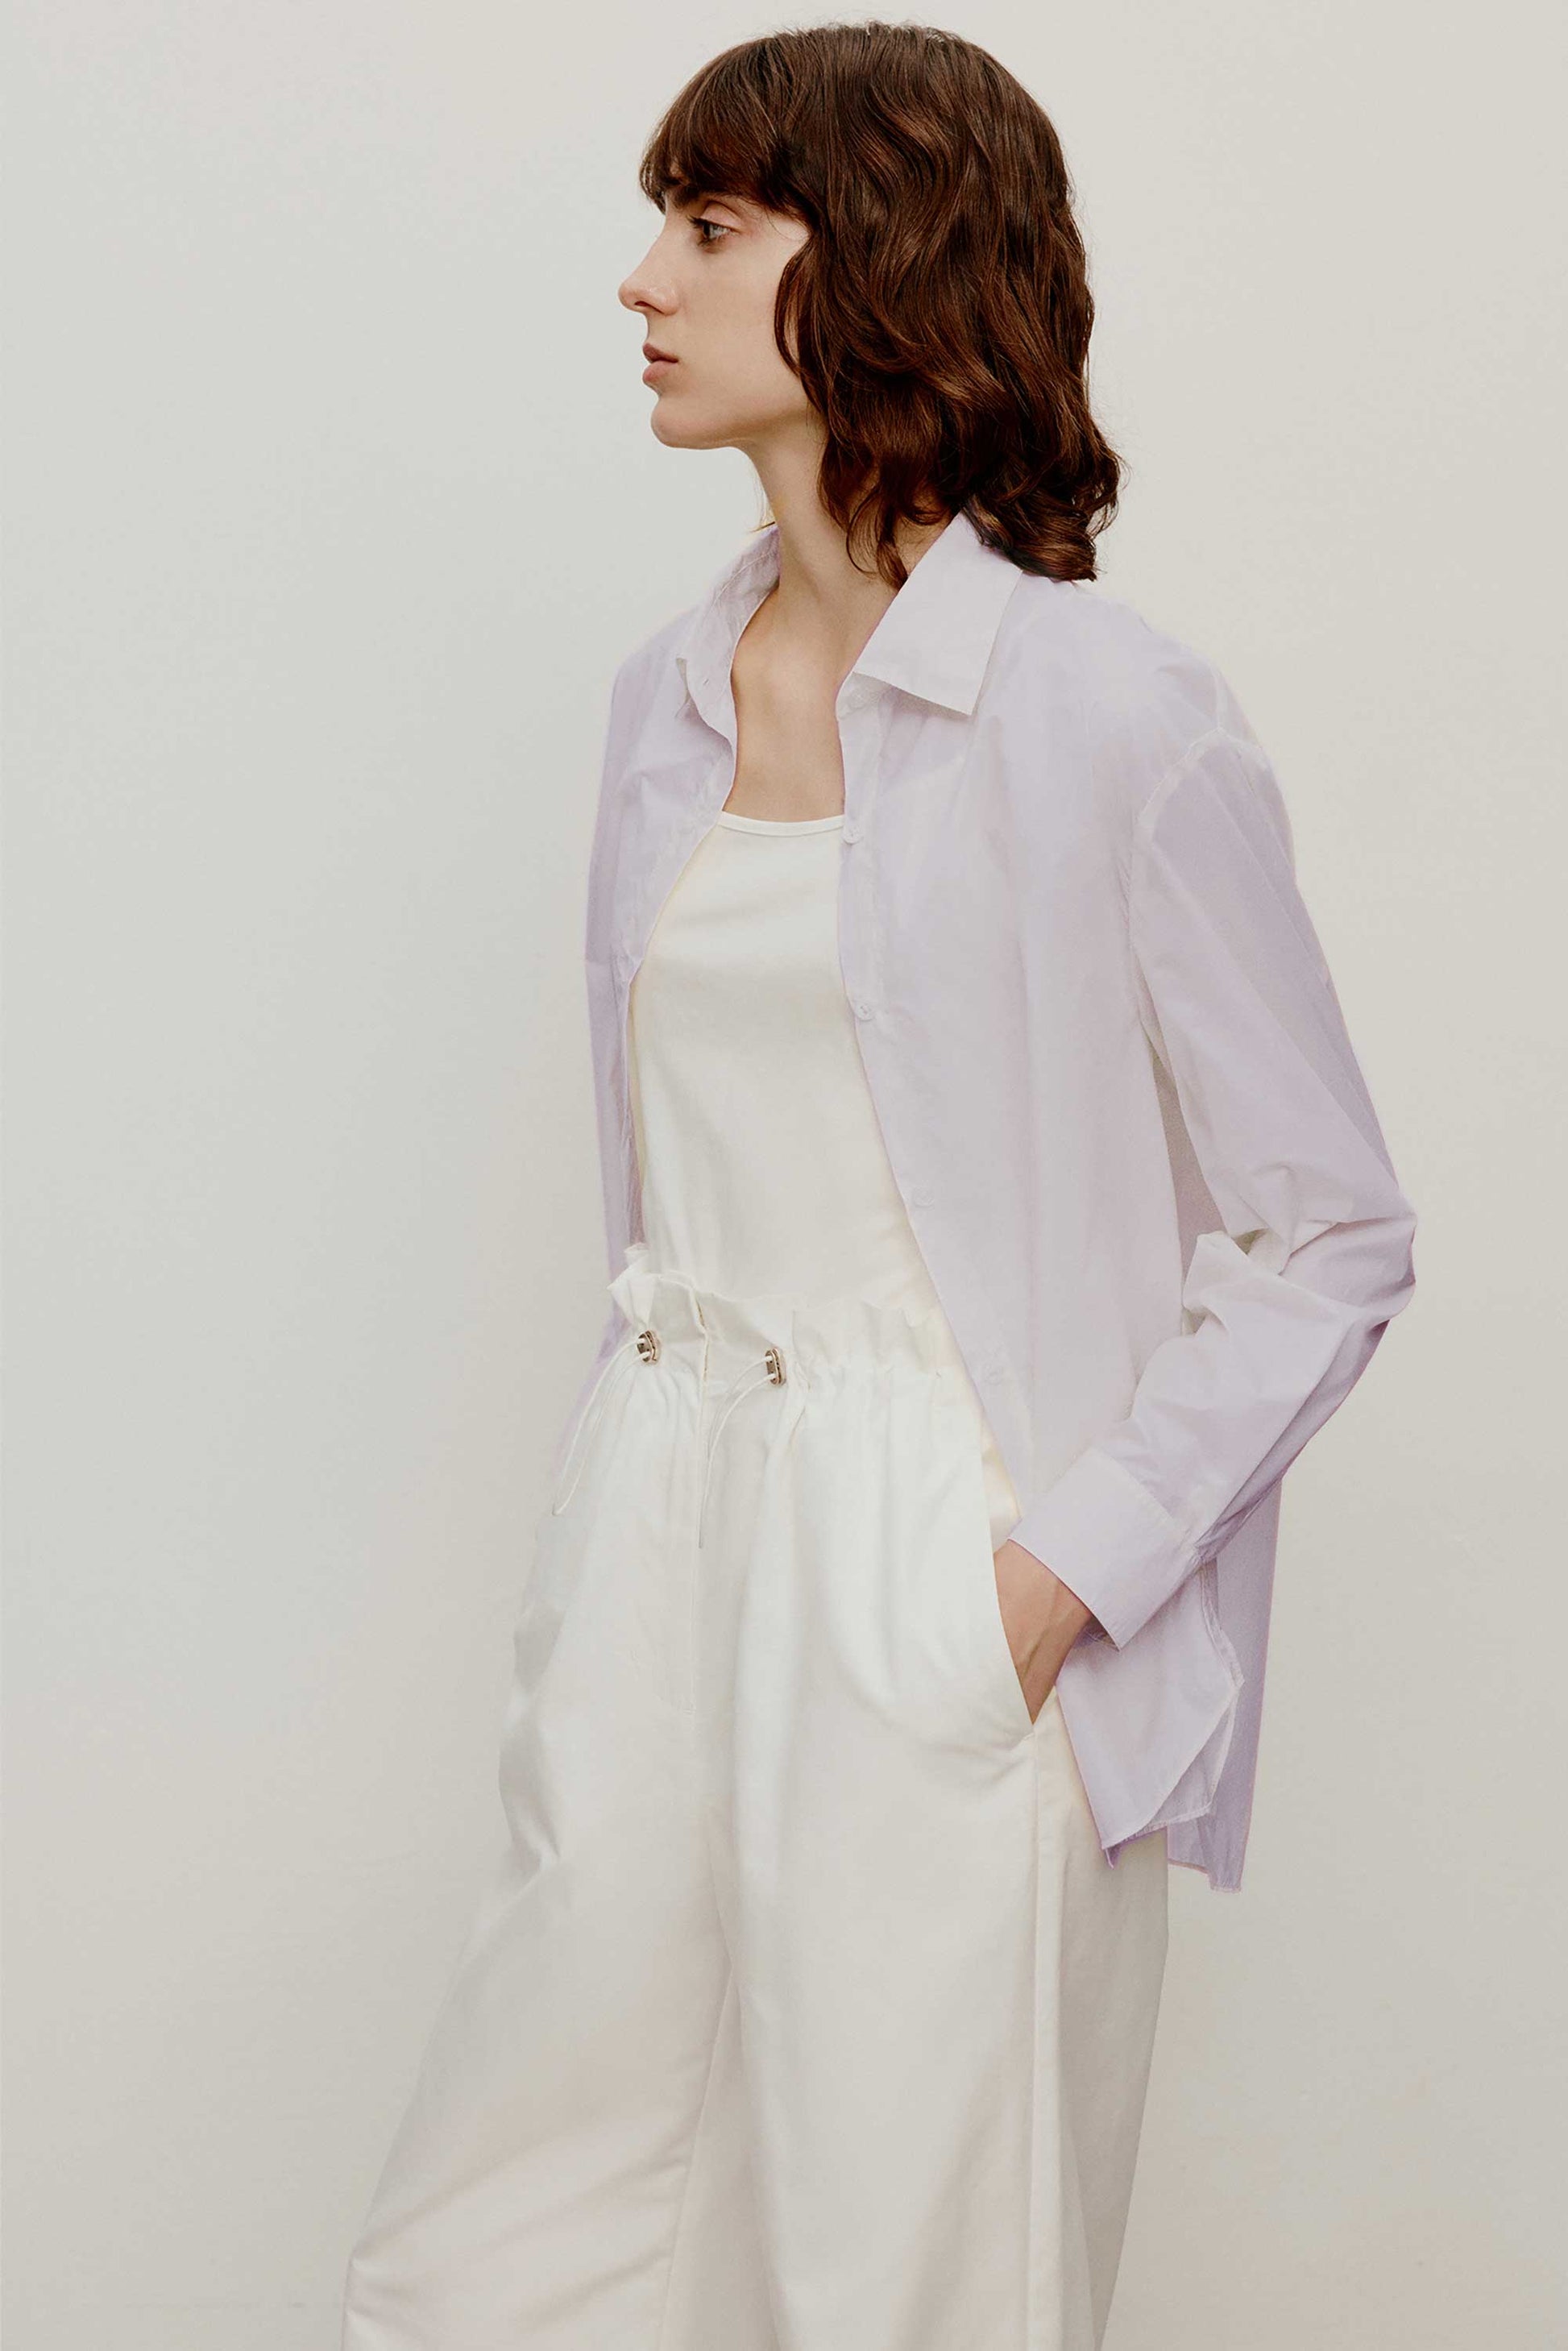 side of a woman wearing a light purple shirt with white camisole underneath and a white pants.